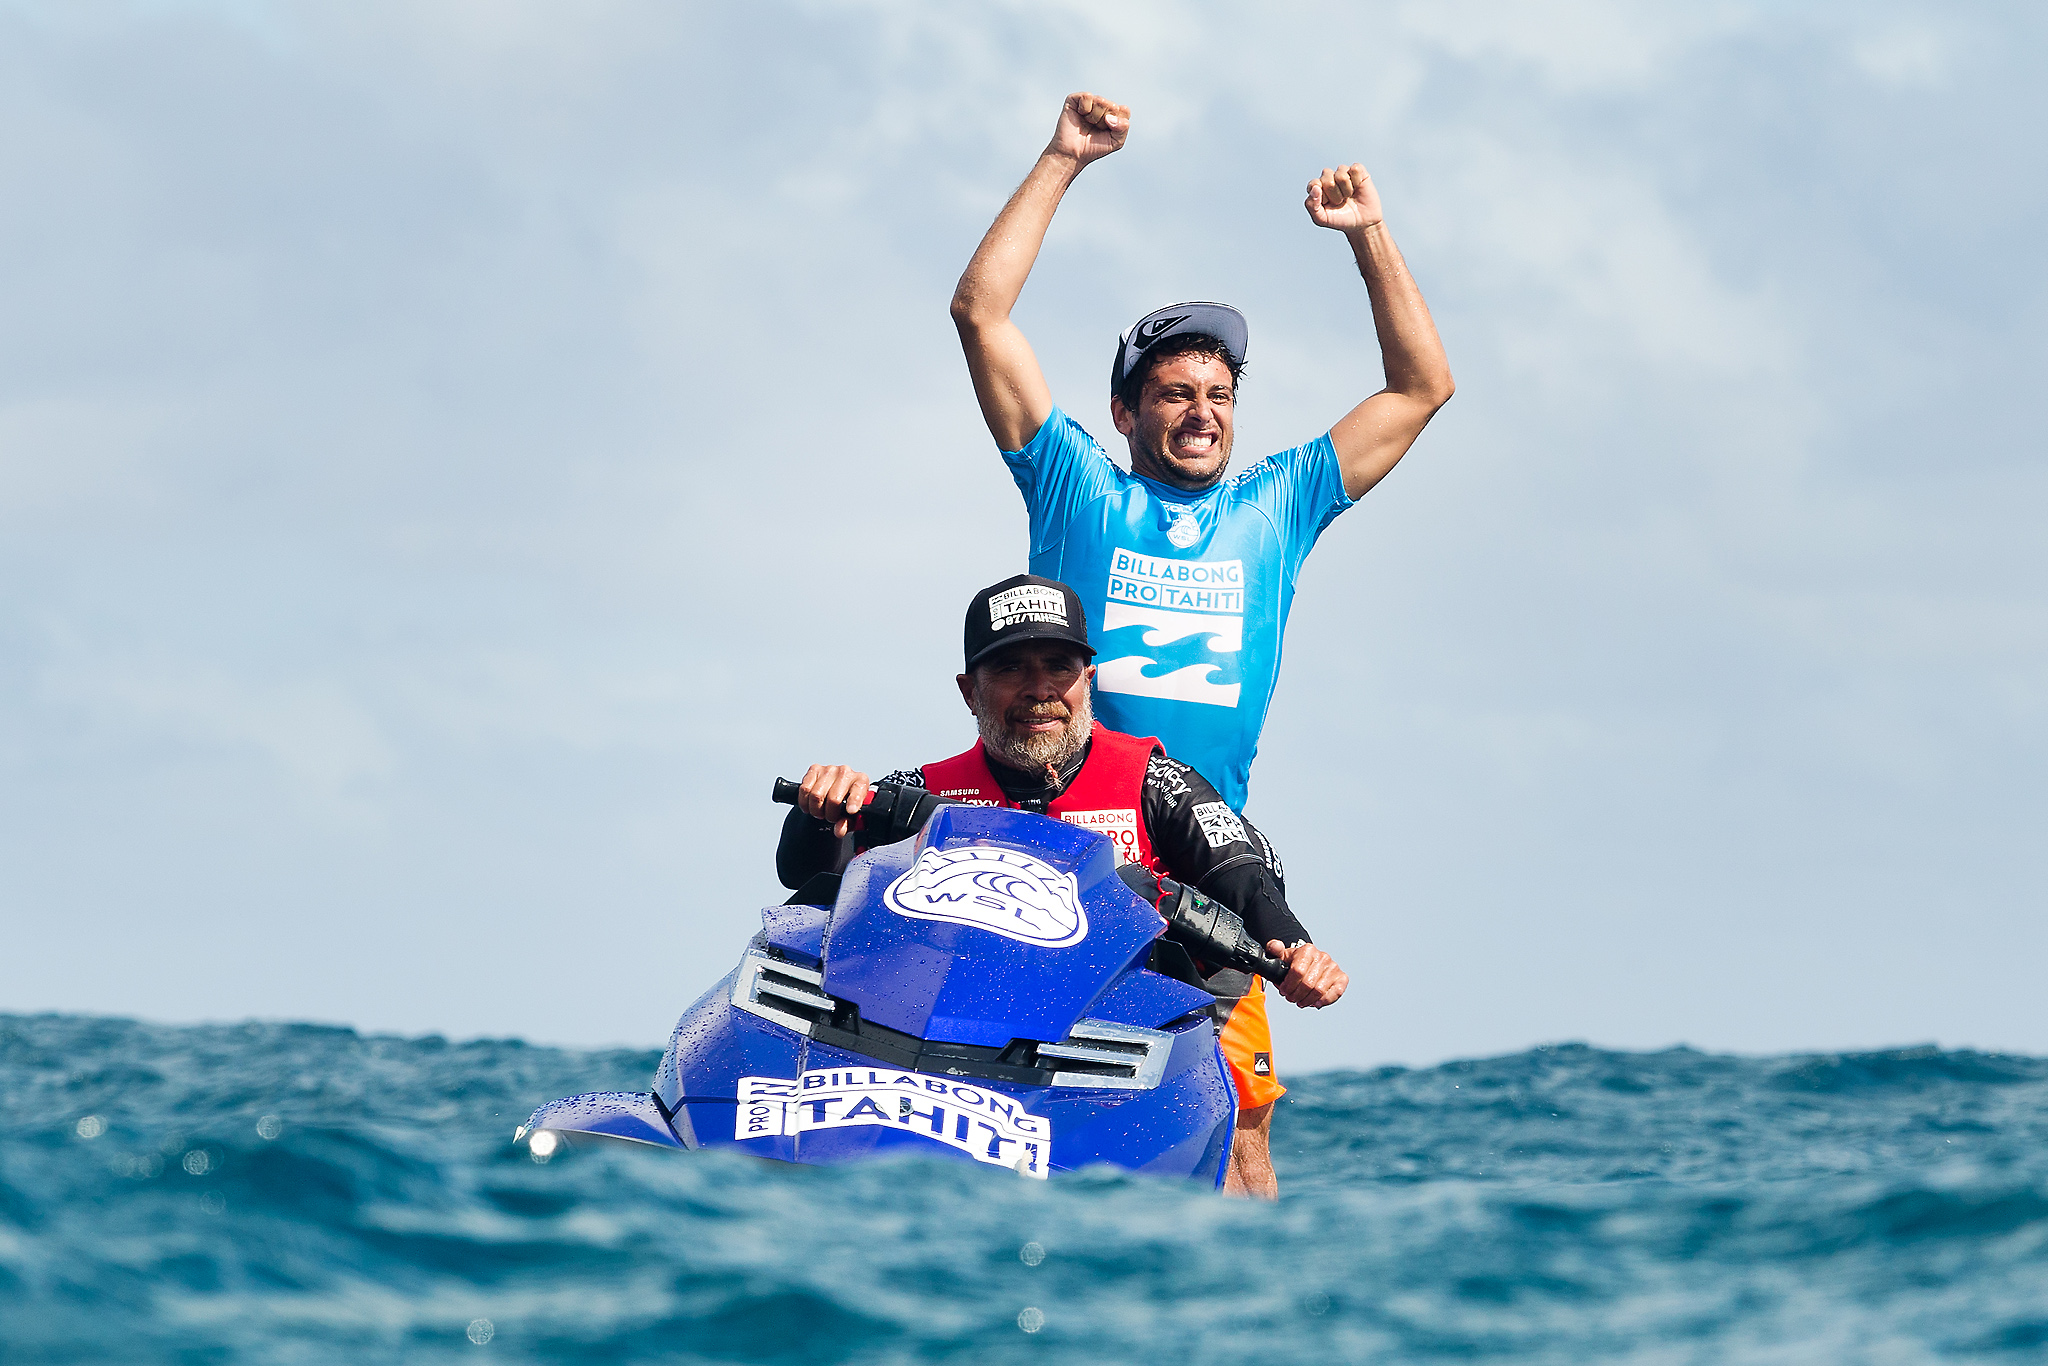 Jeremy Flores of Capbreton, France (pictured) won the Billabong Pro Tahiti by defeating reigning WSL World Champion and defending event winner Gabriel Medina (BRA) in the final at Teahupoo on 25 August 2015. IMAGE CREDIT: WSL / Cestari PHOTOGRAPHER: Kelly Cestari SOCIAL MEDIA TAG: @wsl @kc80 The images attached or accessed by link within this email ("Images") are hand-out images from the Association of Surfing Professionals LLC ("World Surf League"). All Images are royalty-free but for editorial use only. No commercial or other rights are granted to the Images in any way. The Images are provided on an "as is" basis and no warranty is provided for use of a particular purpose. Rights to an individual within an Image are not provided. Copyright to the Images is owned by World Surf League. Sale or license of the Images is prohibited. ALL RIGHTS RESERVED.